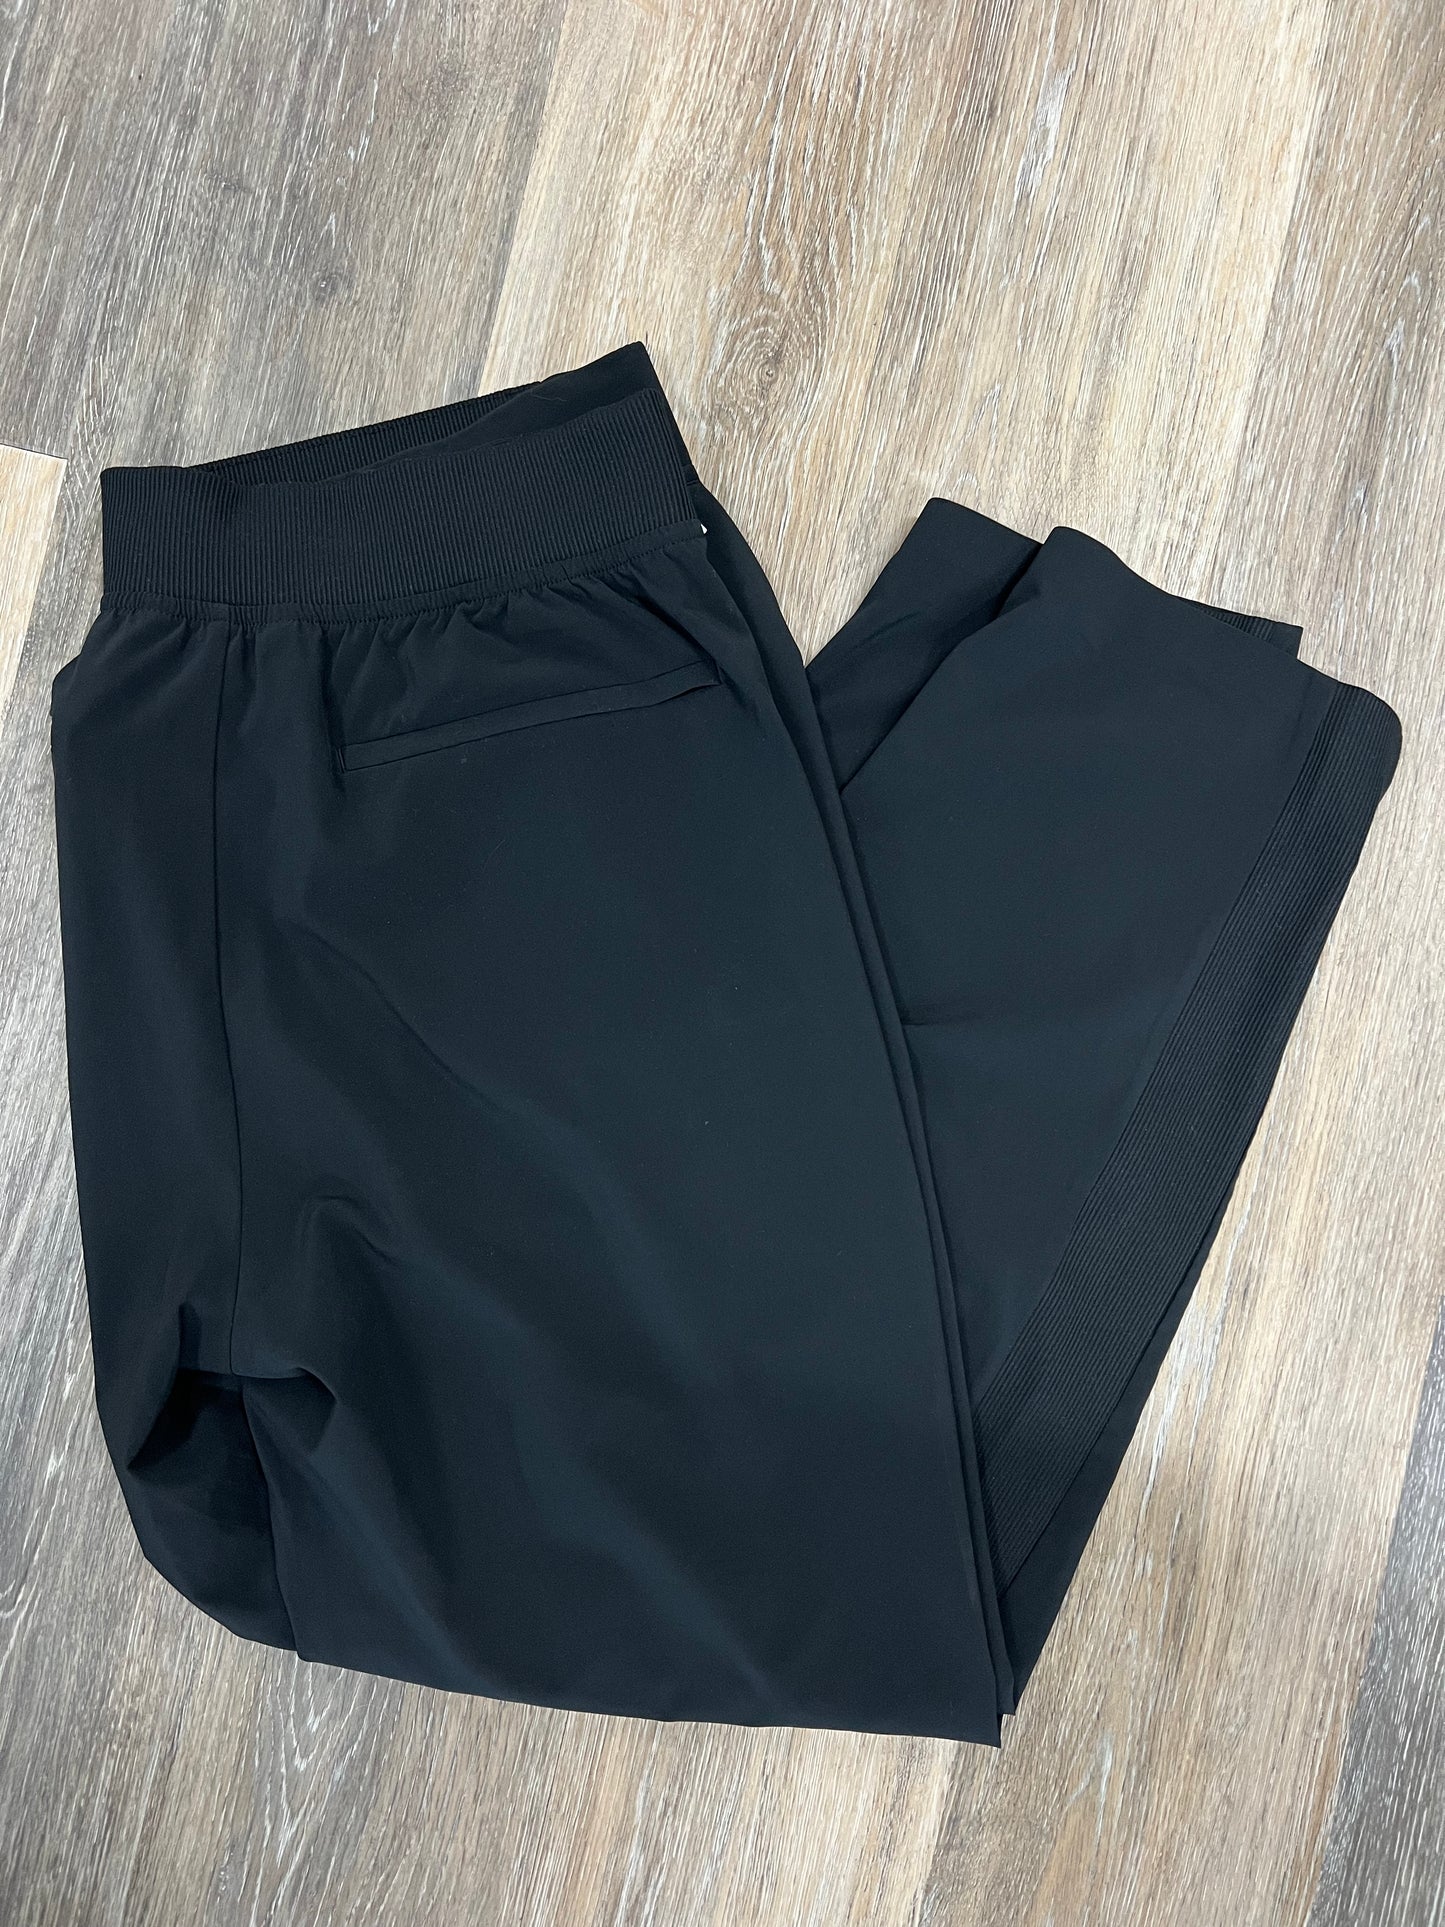 Athletic Pants By Athleta  Size: 16